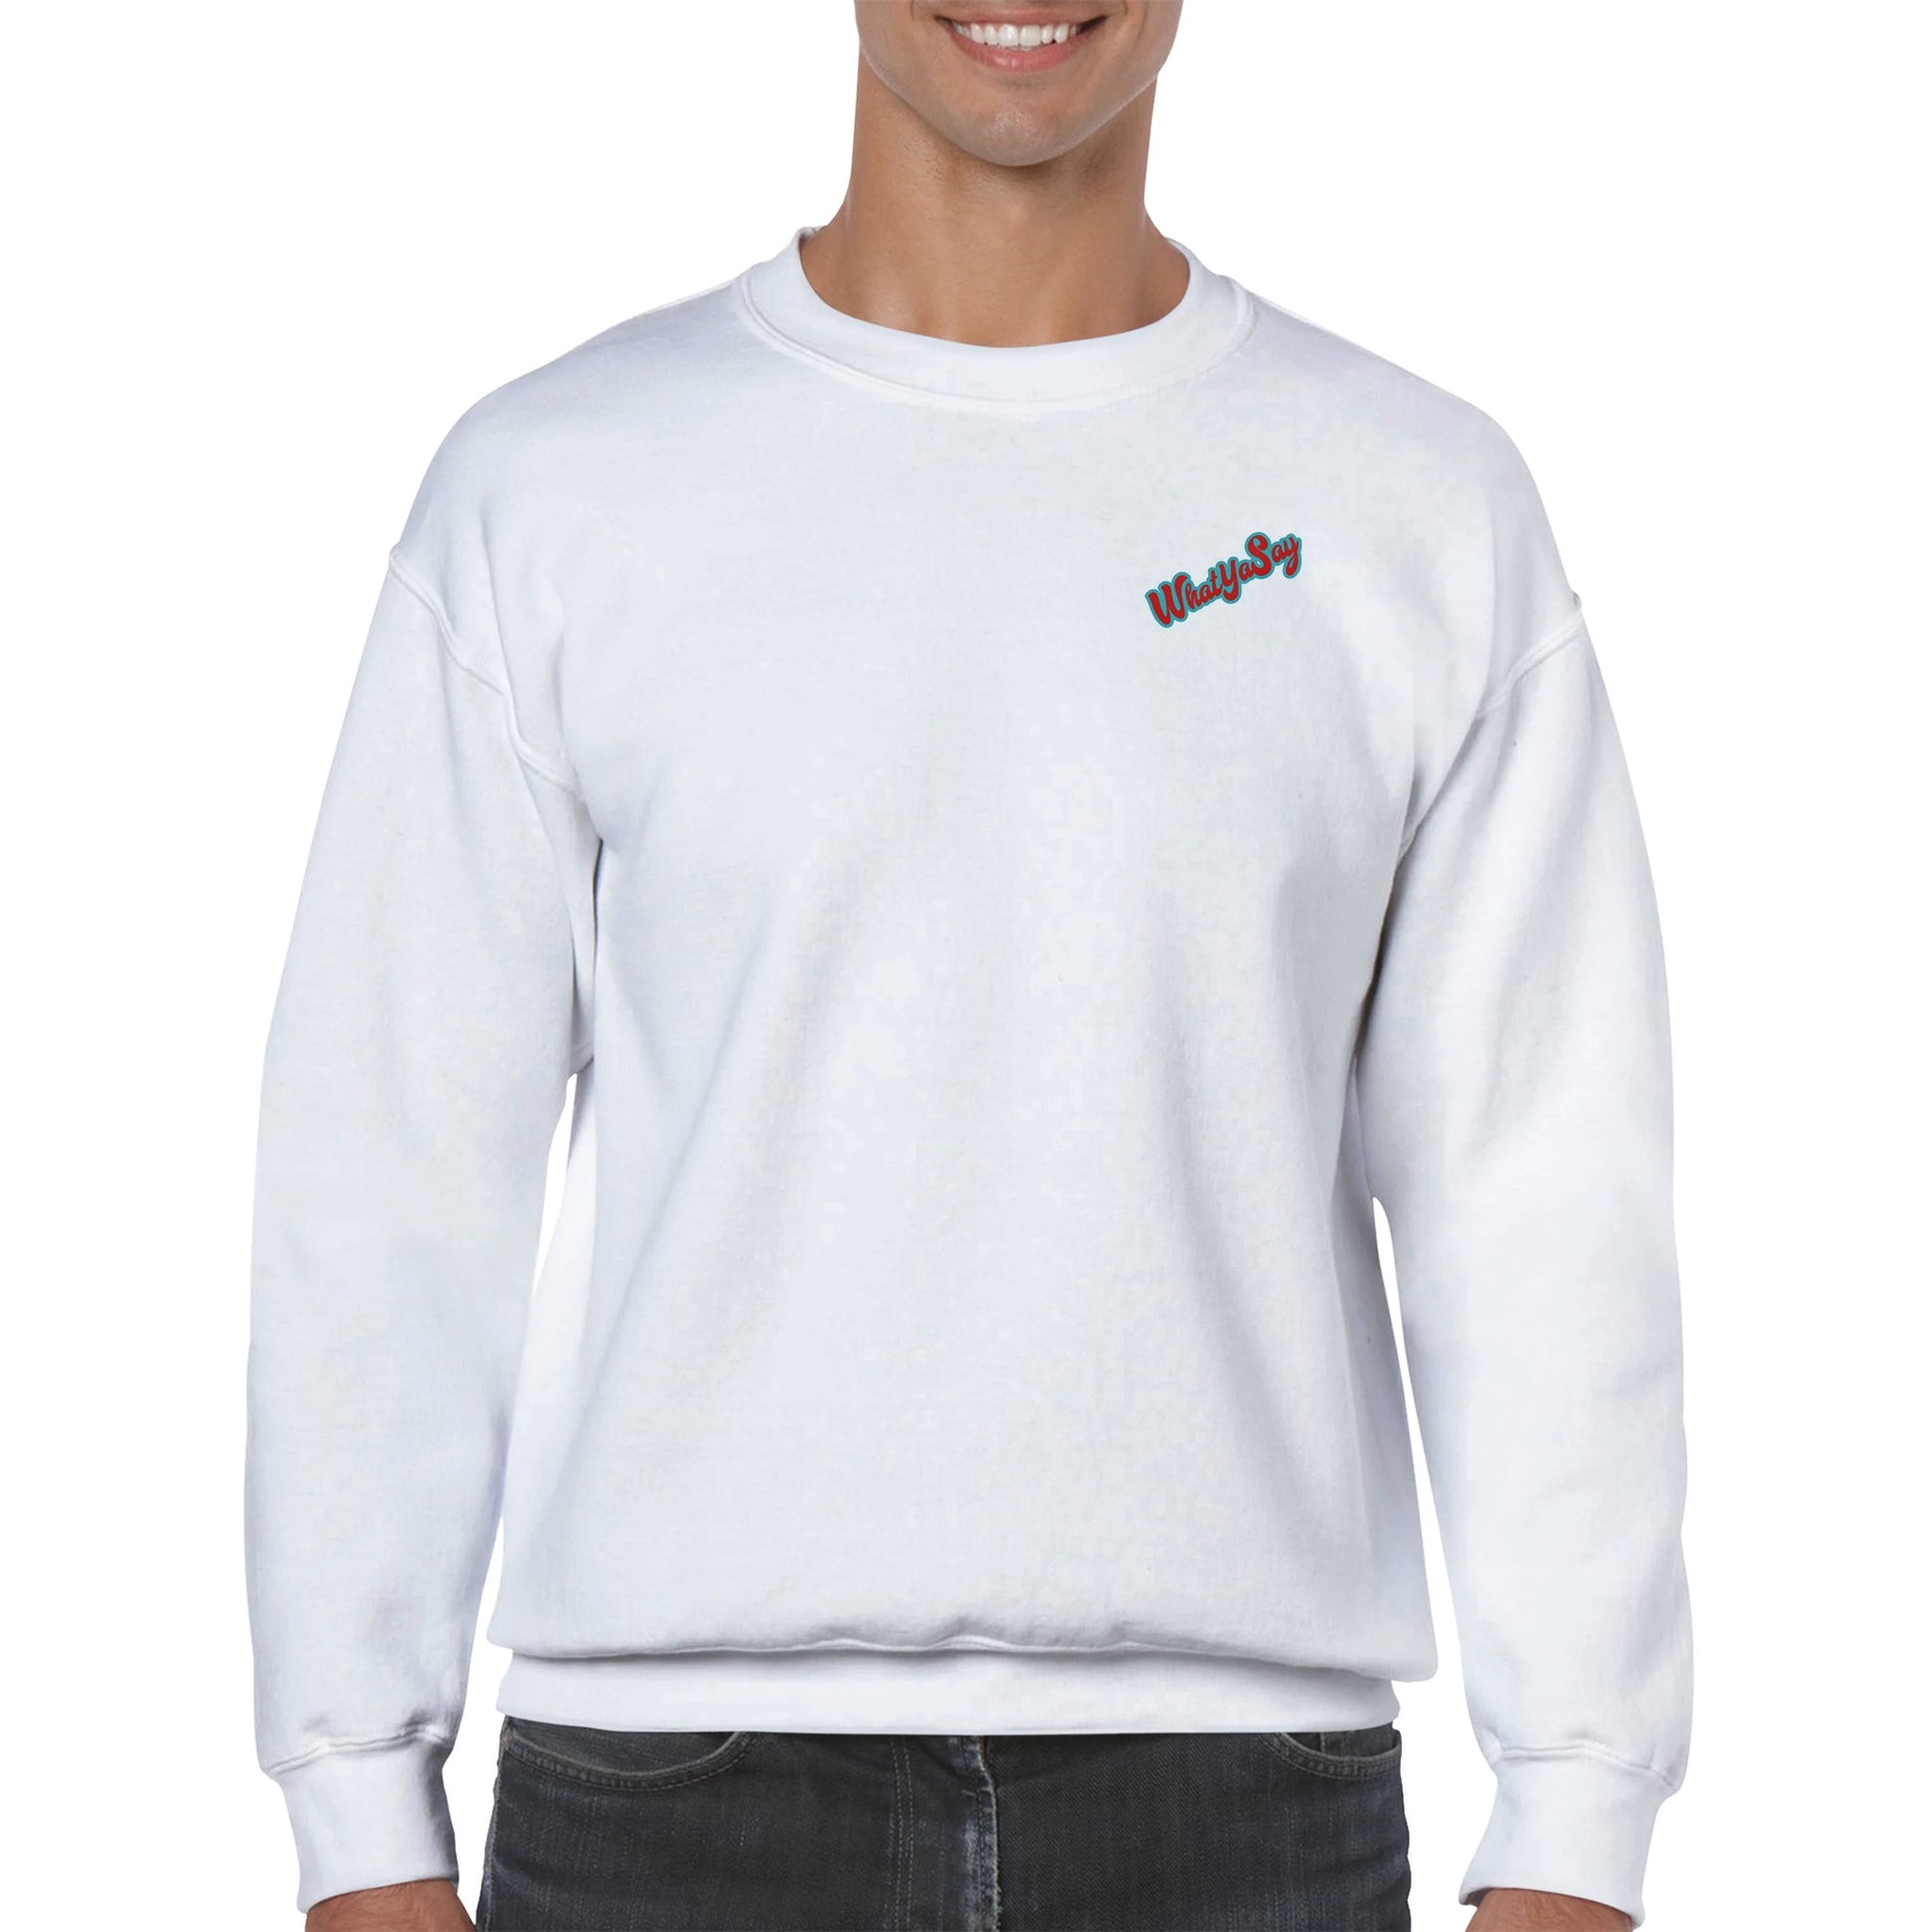 A white Classic Unisex Crewneck sweatshirt with original artwork and motto I Got 99 Problems But a Margarita Ain’t One on back and Whatya Say logo on front from WhatYa Say Apparel a front view of short haired male model.